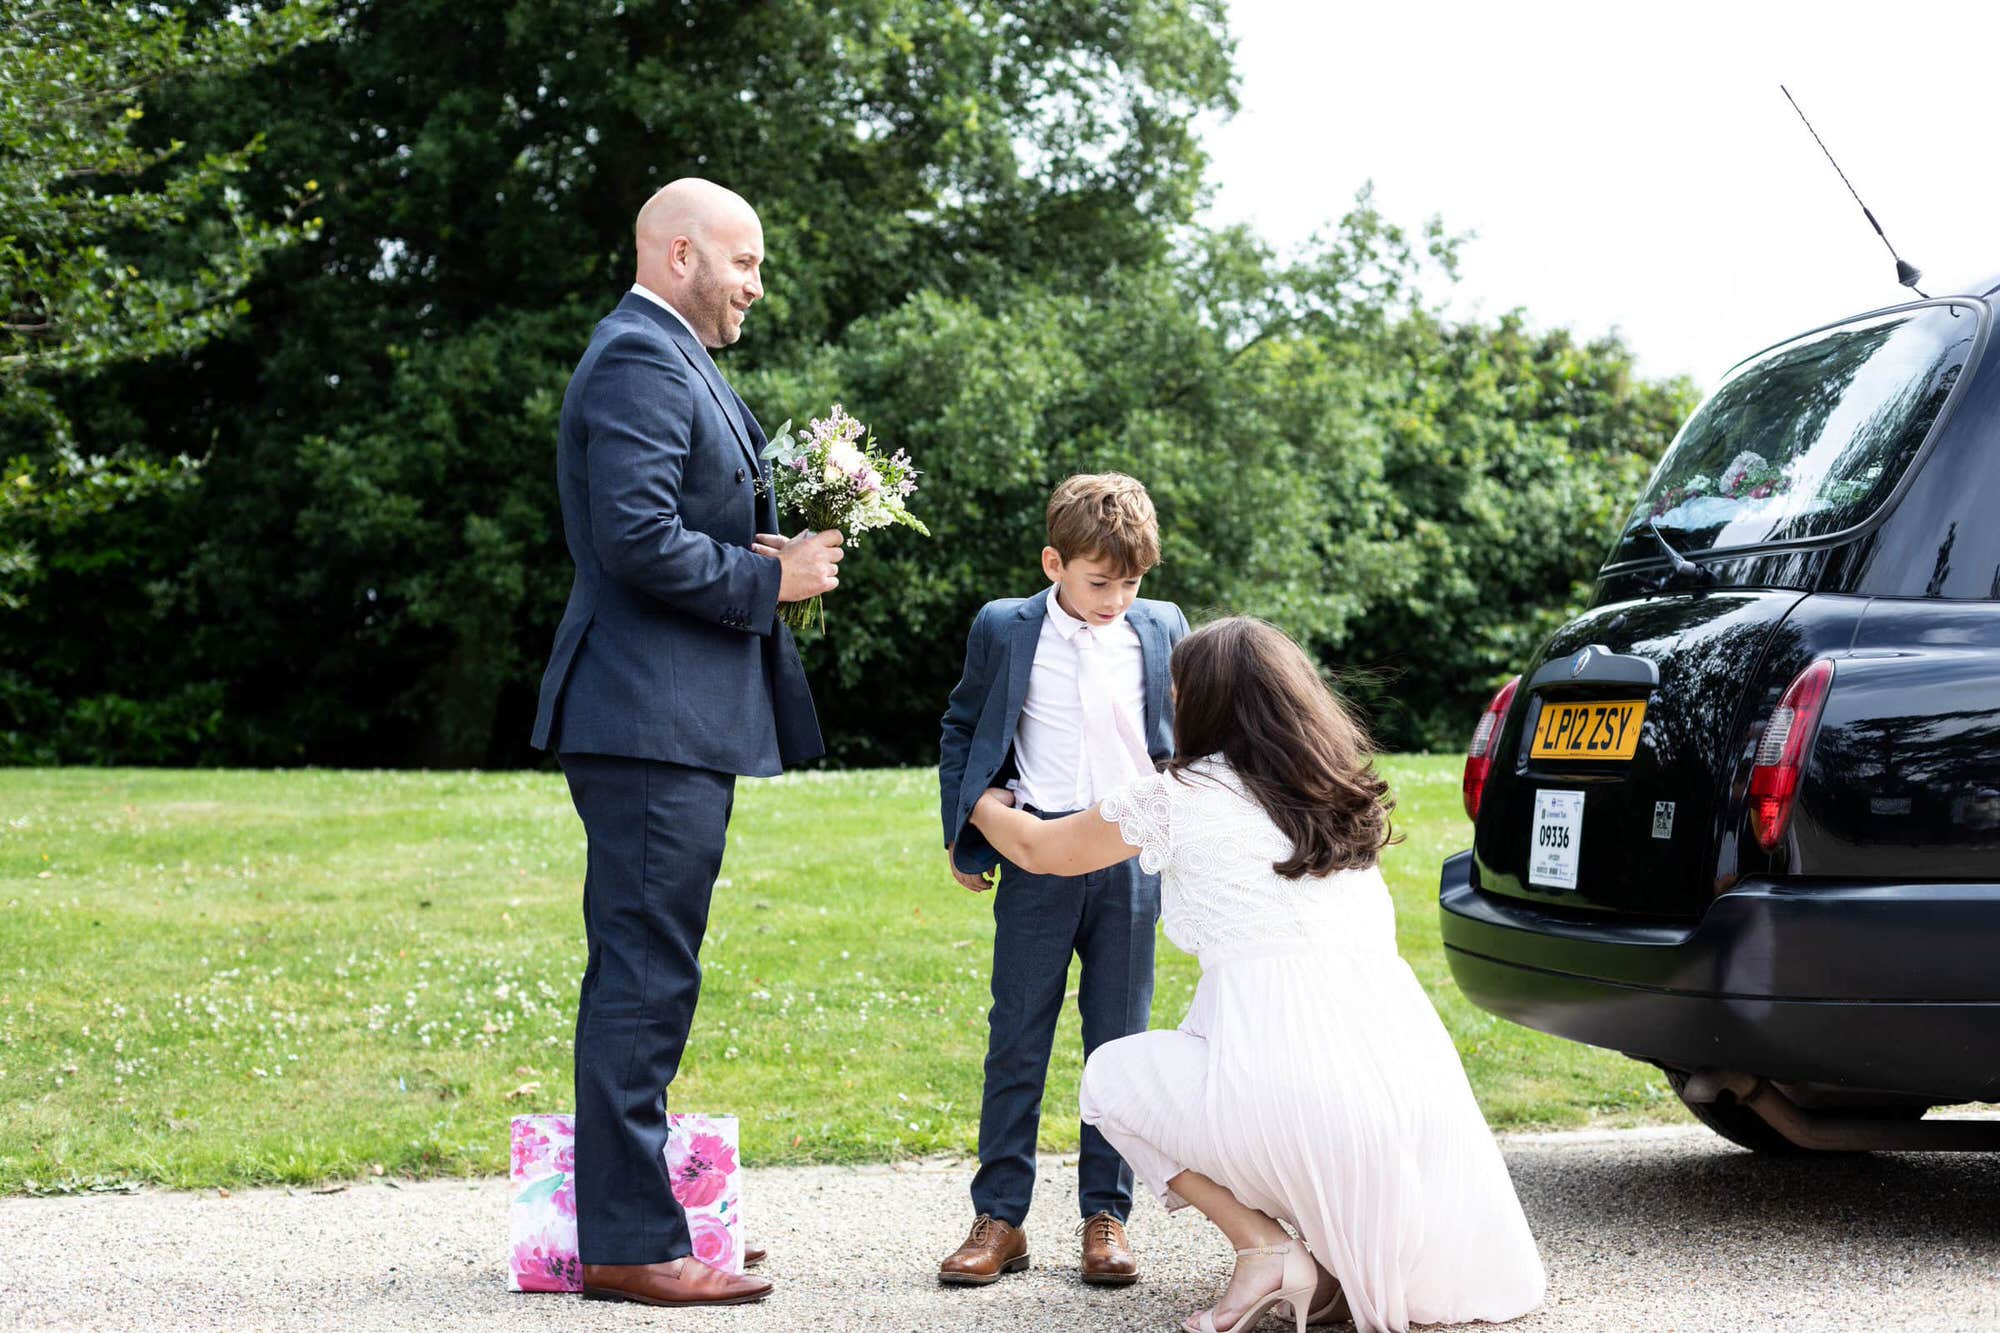 Candid image of a bride, groom and son at Kent micro wedding Danson House Bexleyheath